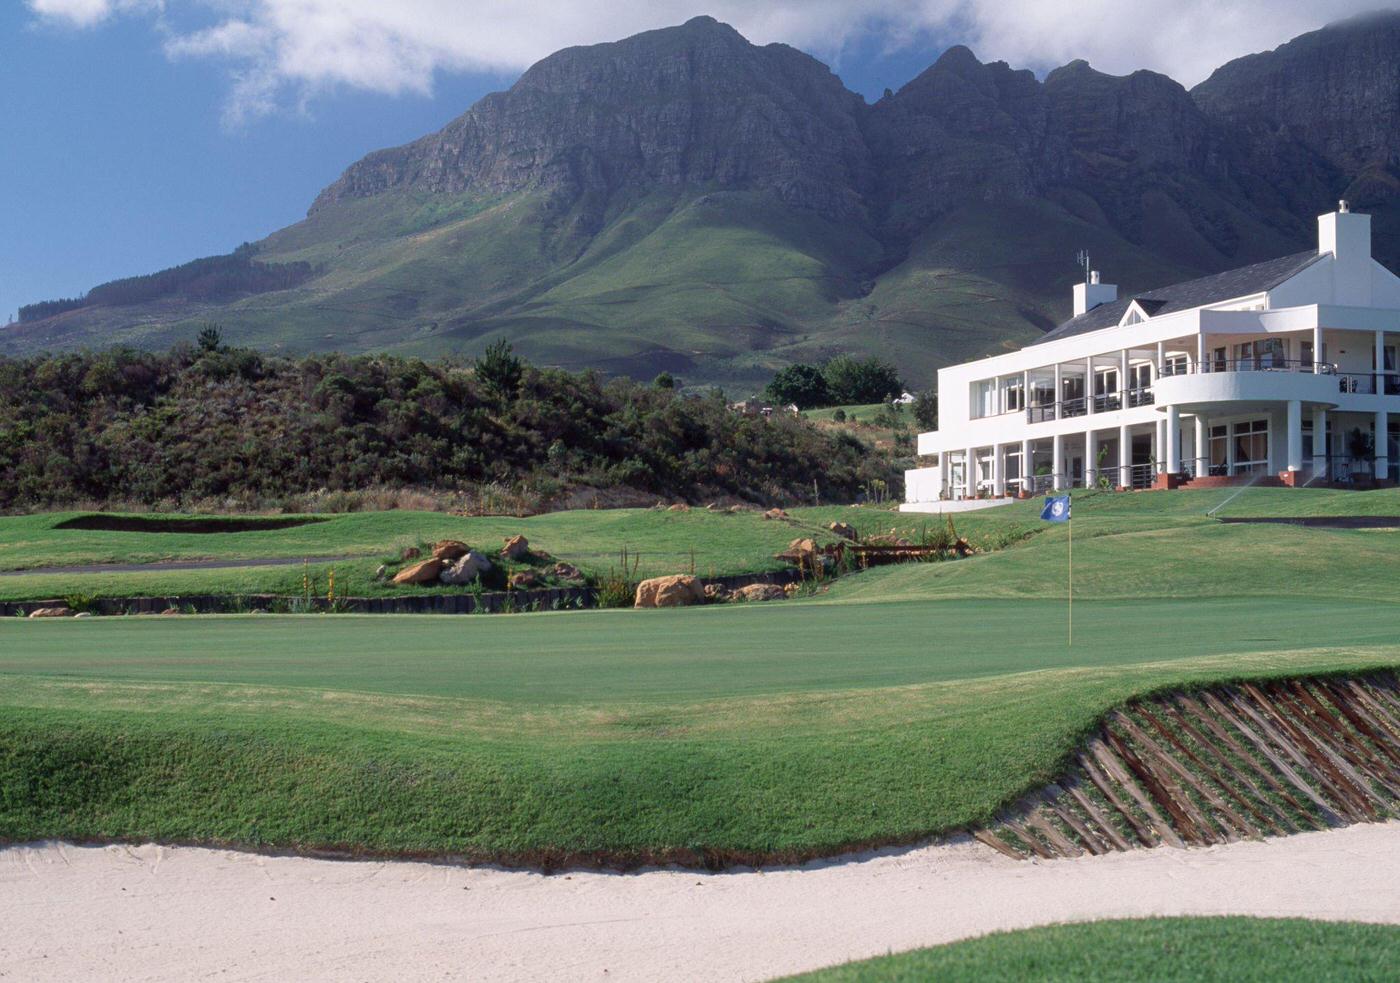 The 9th hole and Club House at the Erinvale Golf Club near Cape Town, 1985